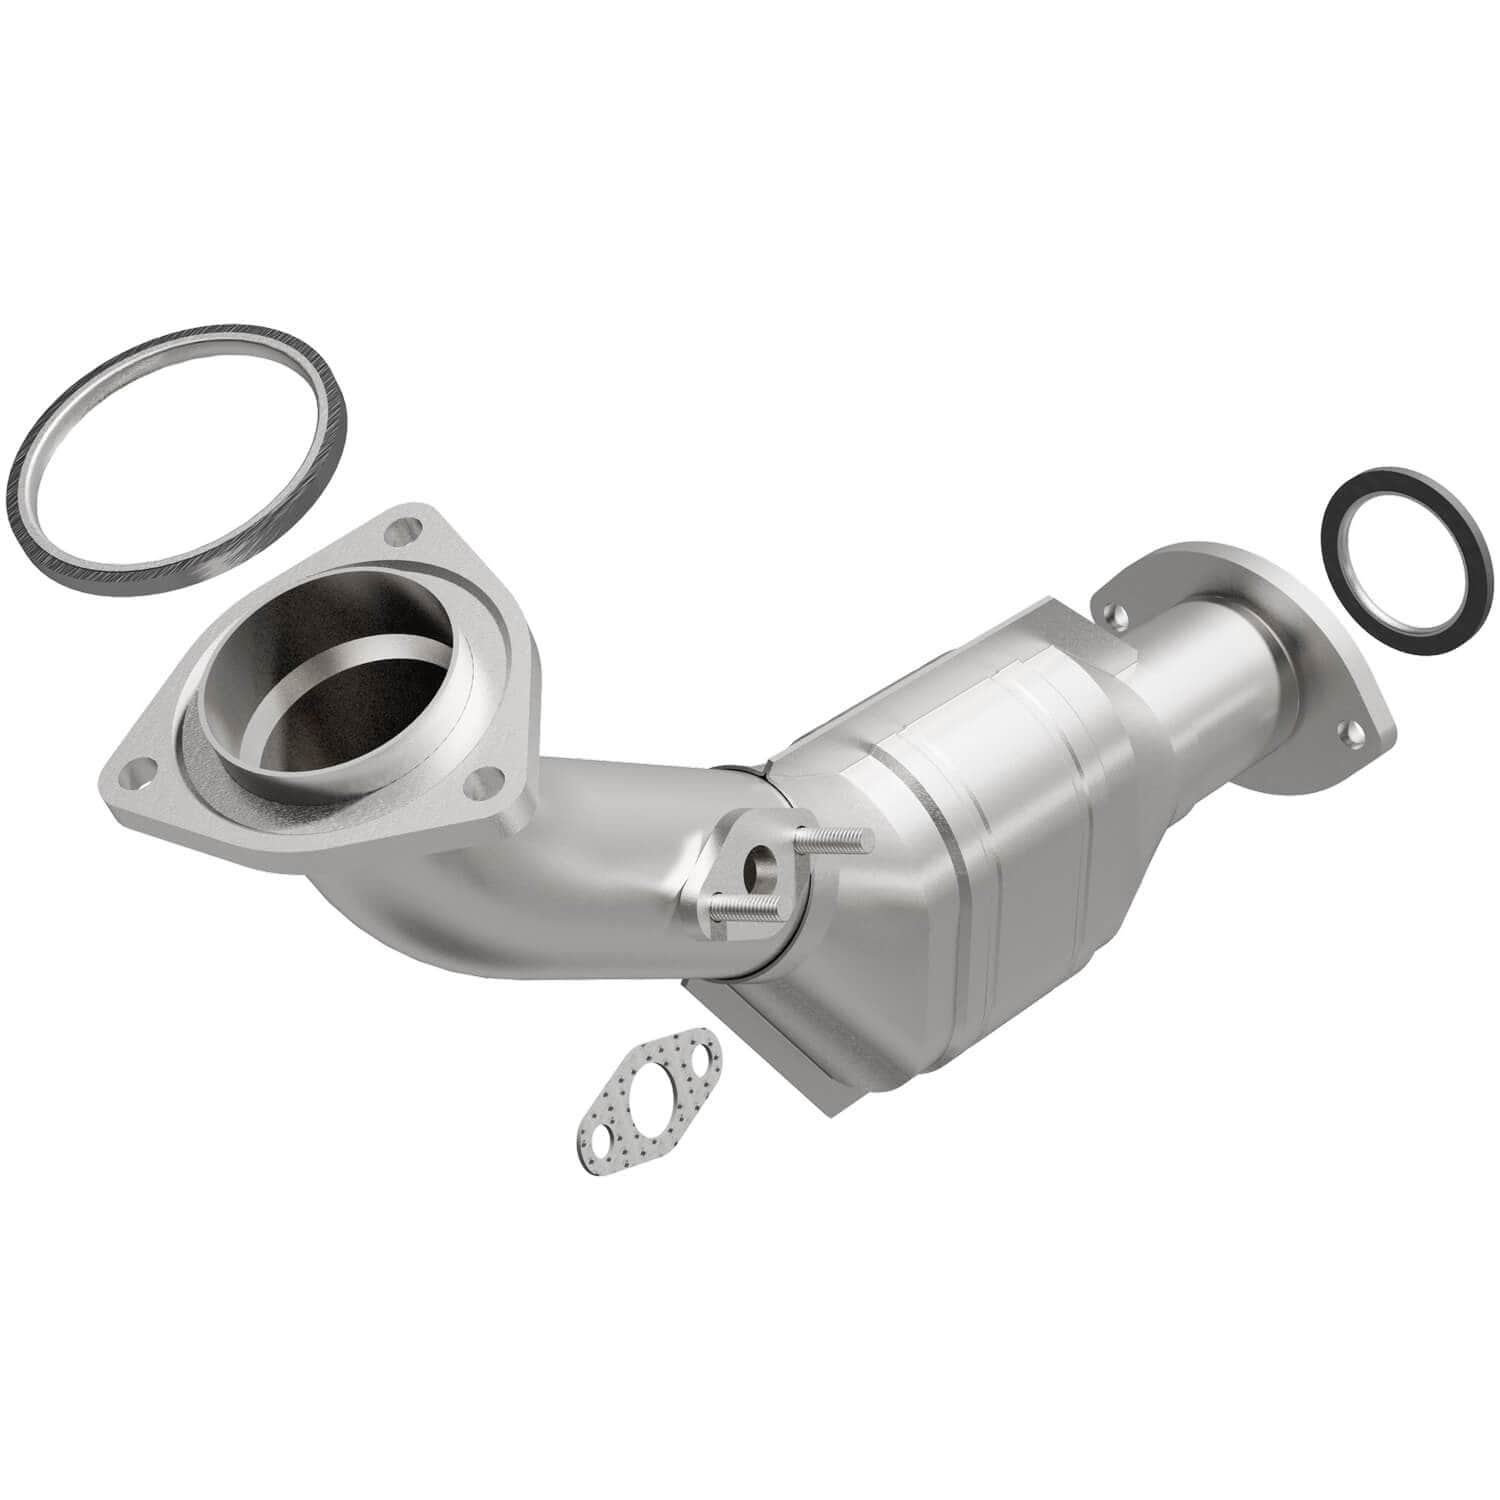 How To Install A Catalytic Converter Without Welding